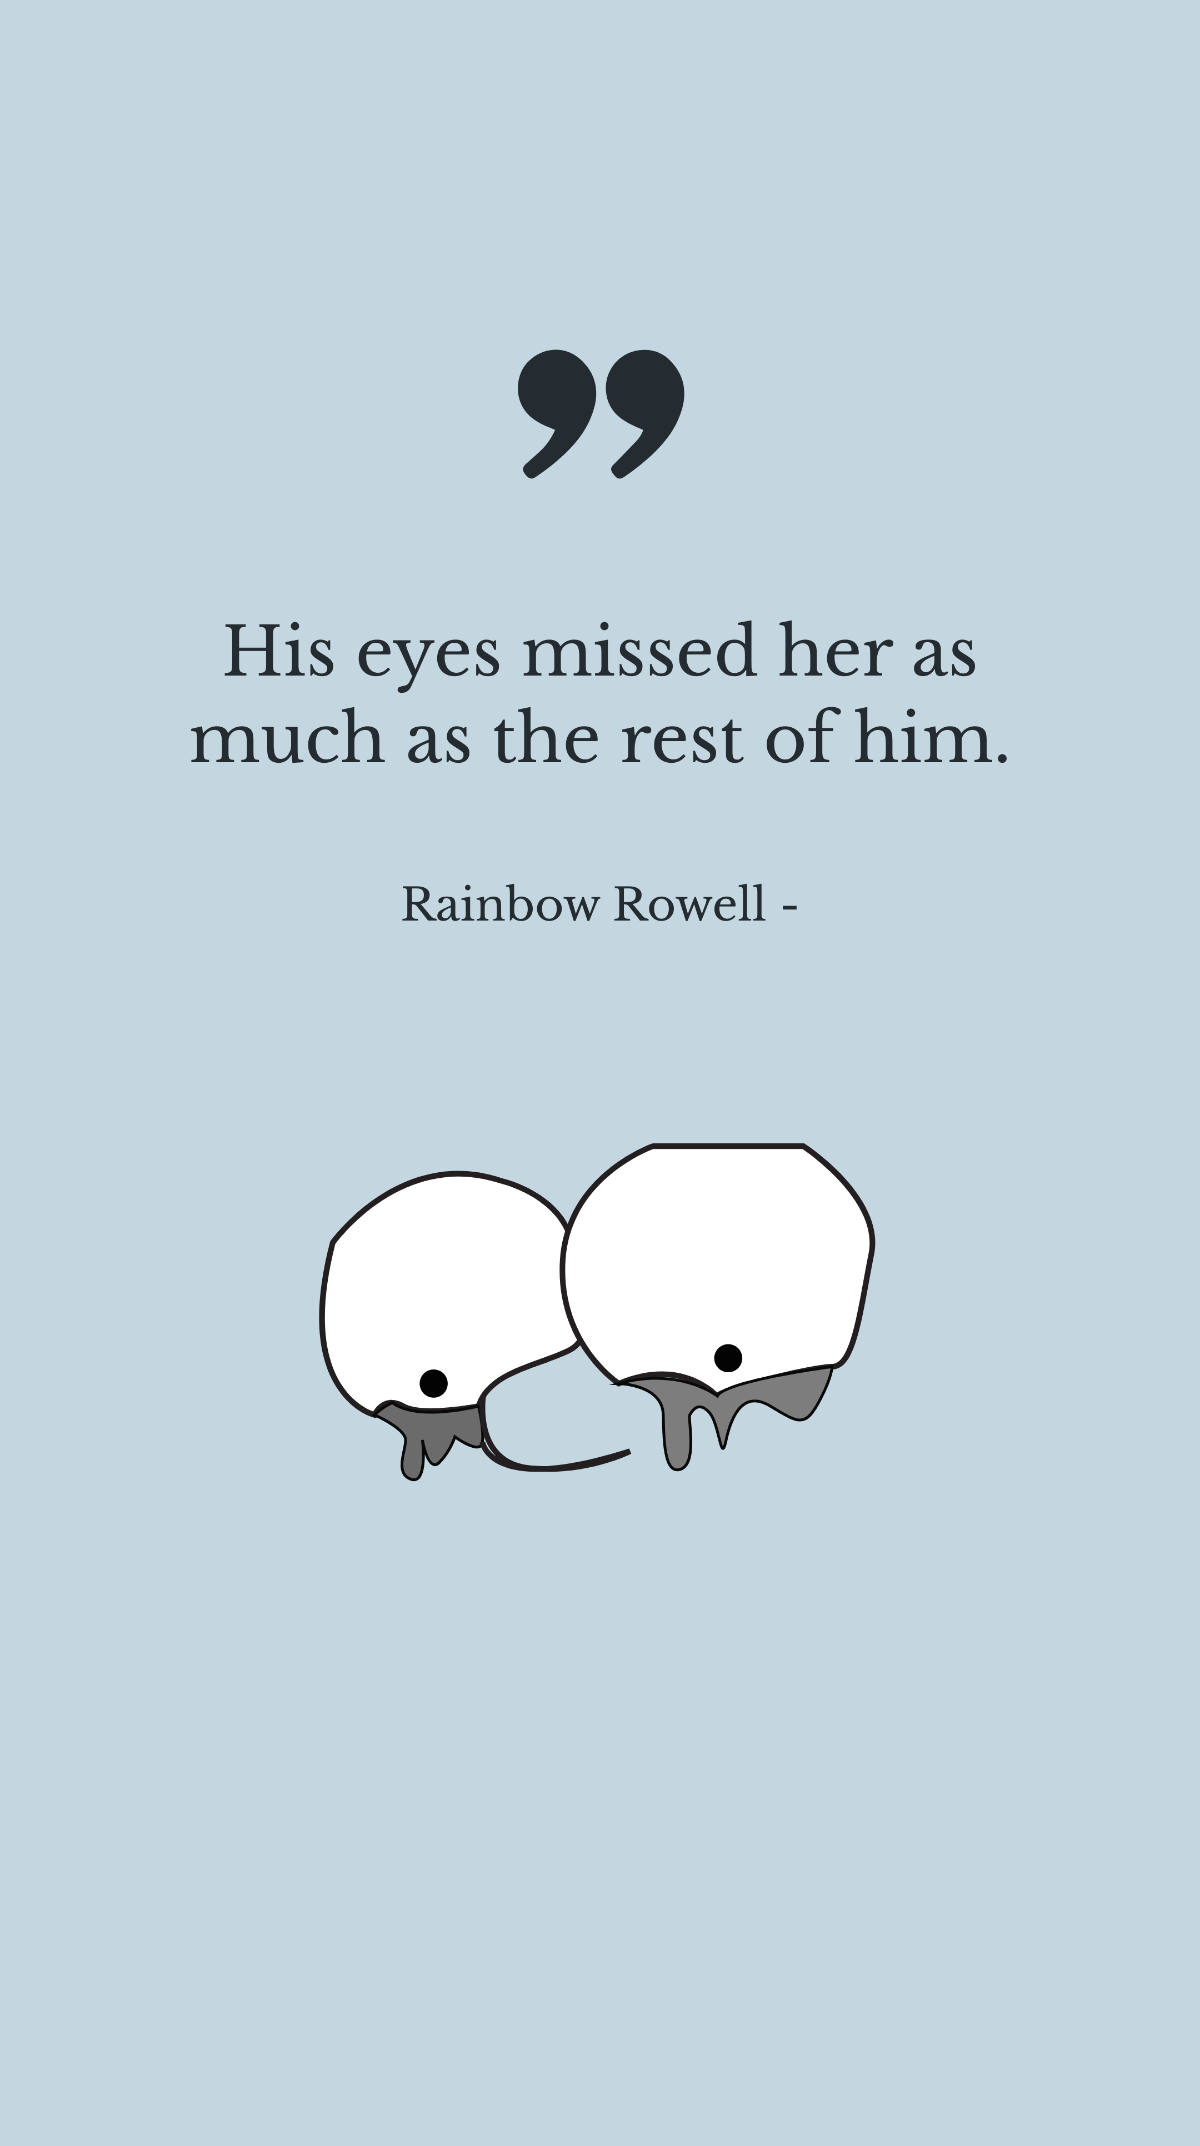 Rainbow Rowell - His eyes missed her as much as the rest of him.